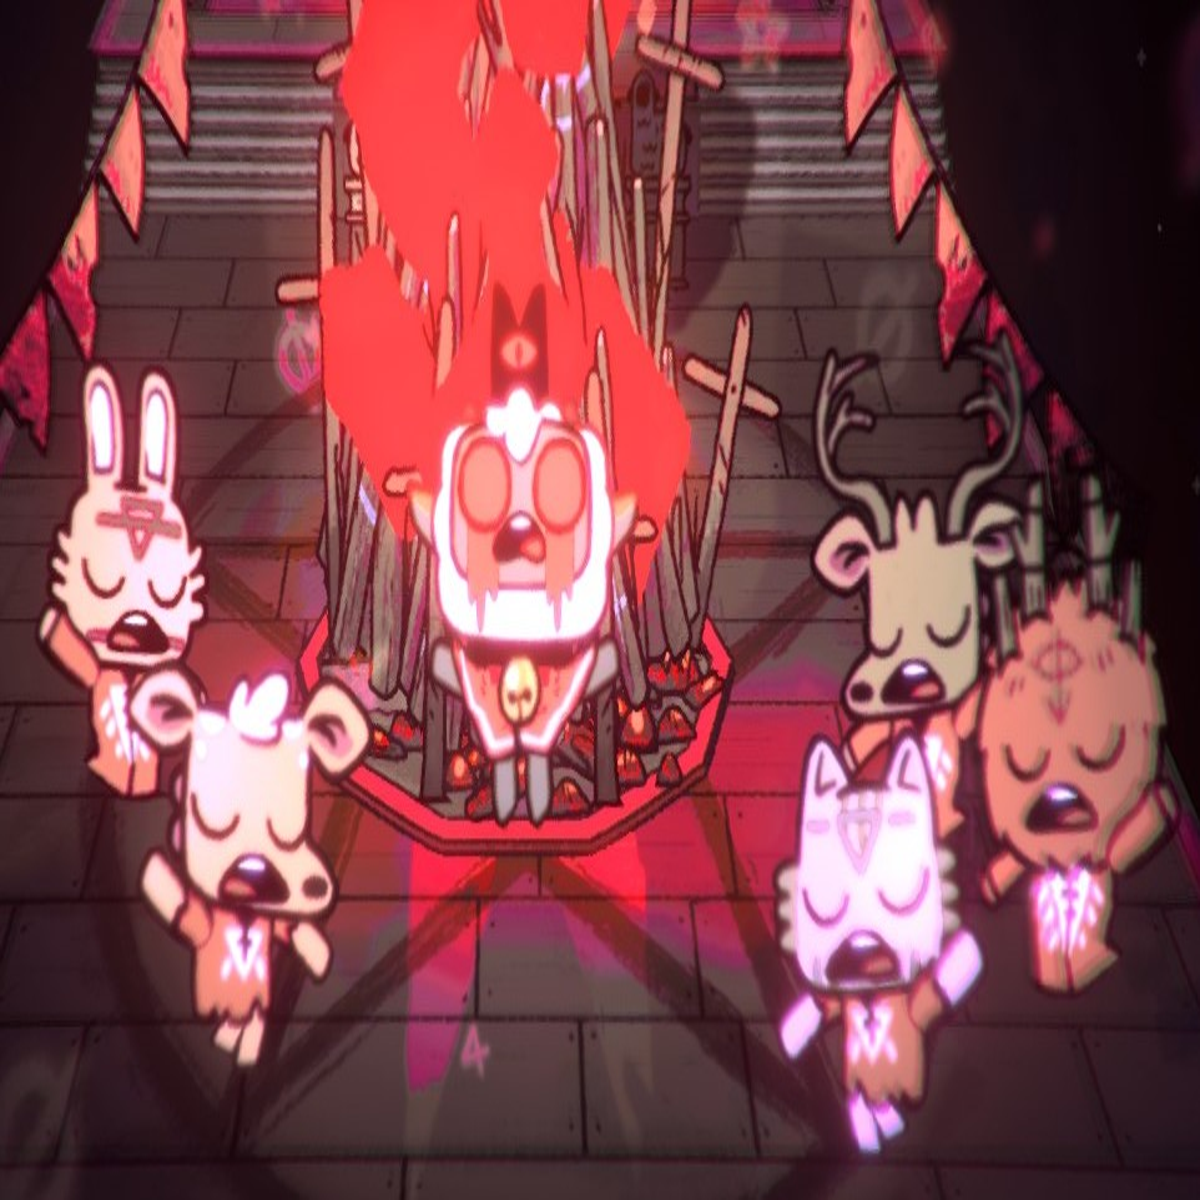 Cult of the Lamb Review: A Grand Clan Led by a Damned Lamb